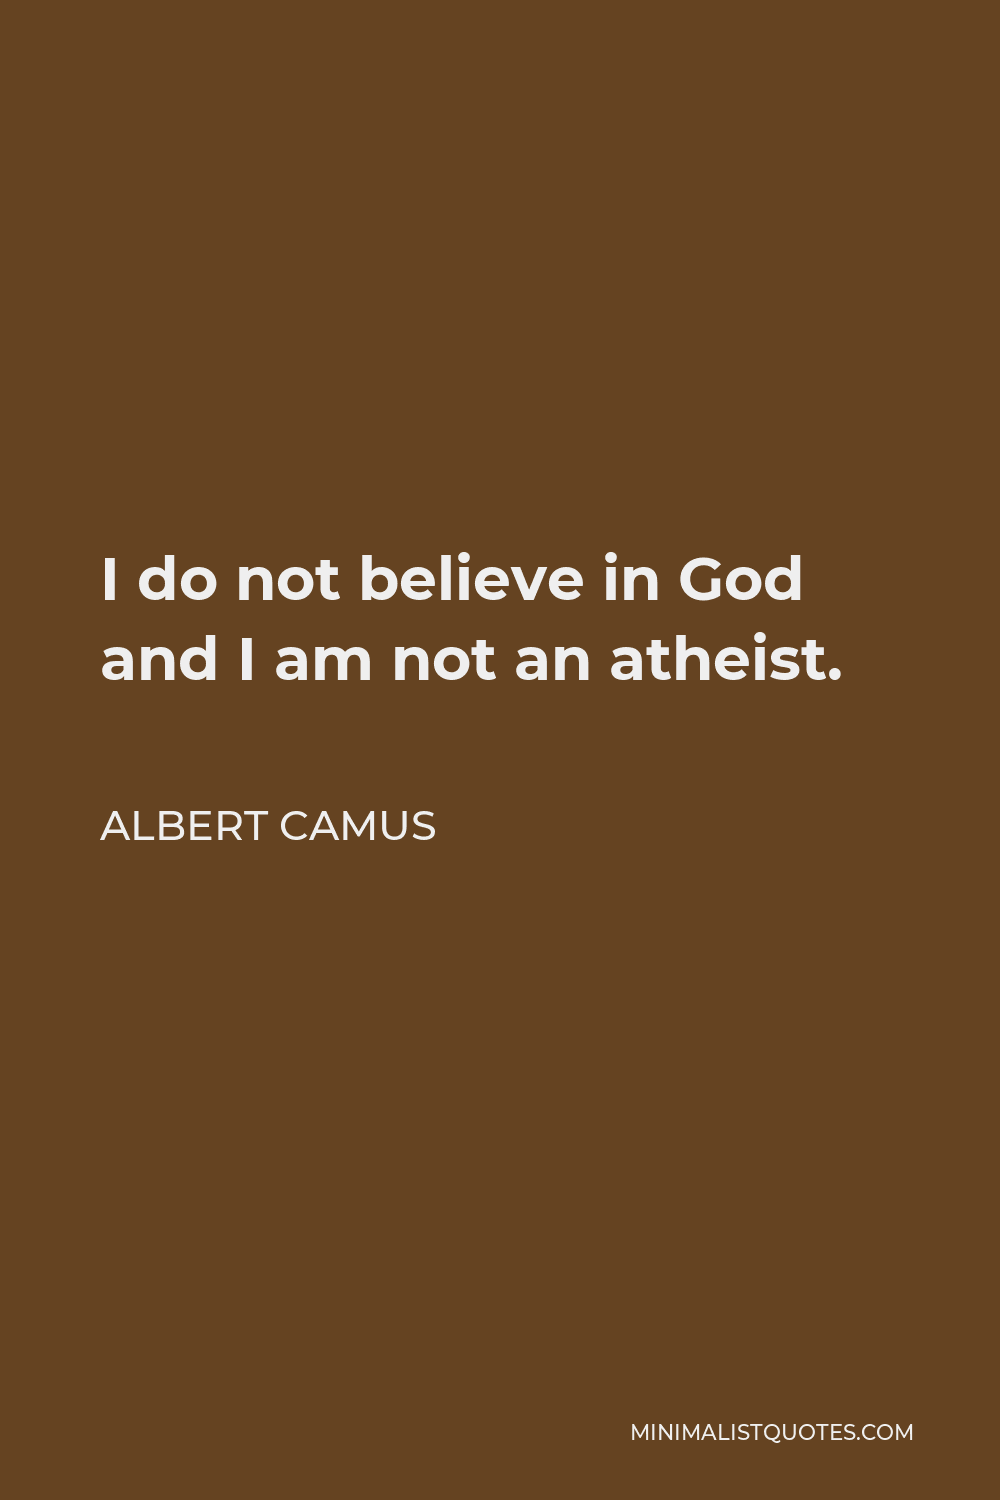 Albert Camus Quote - I do not believe in God and I am not an atheist.